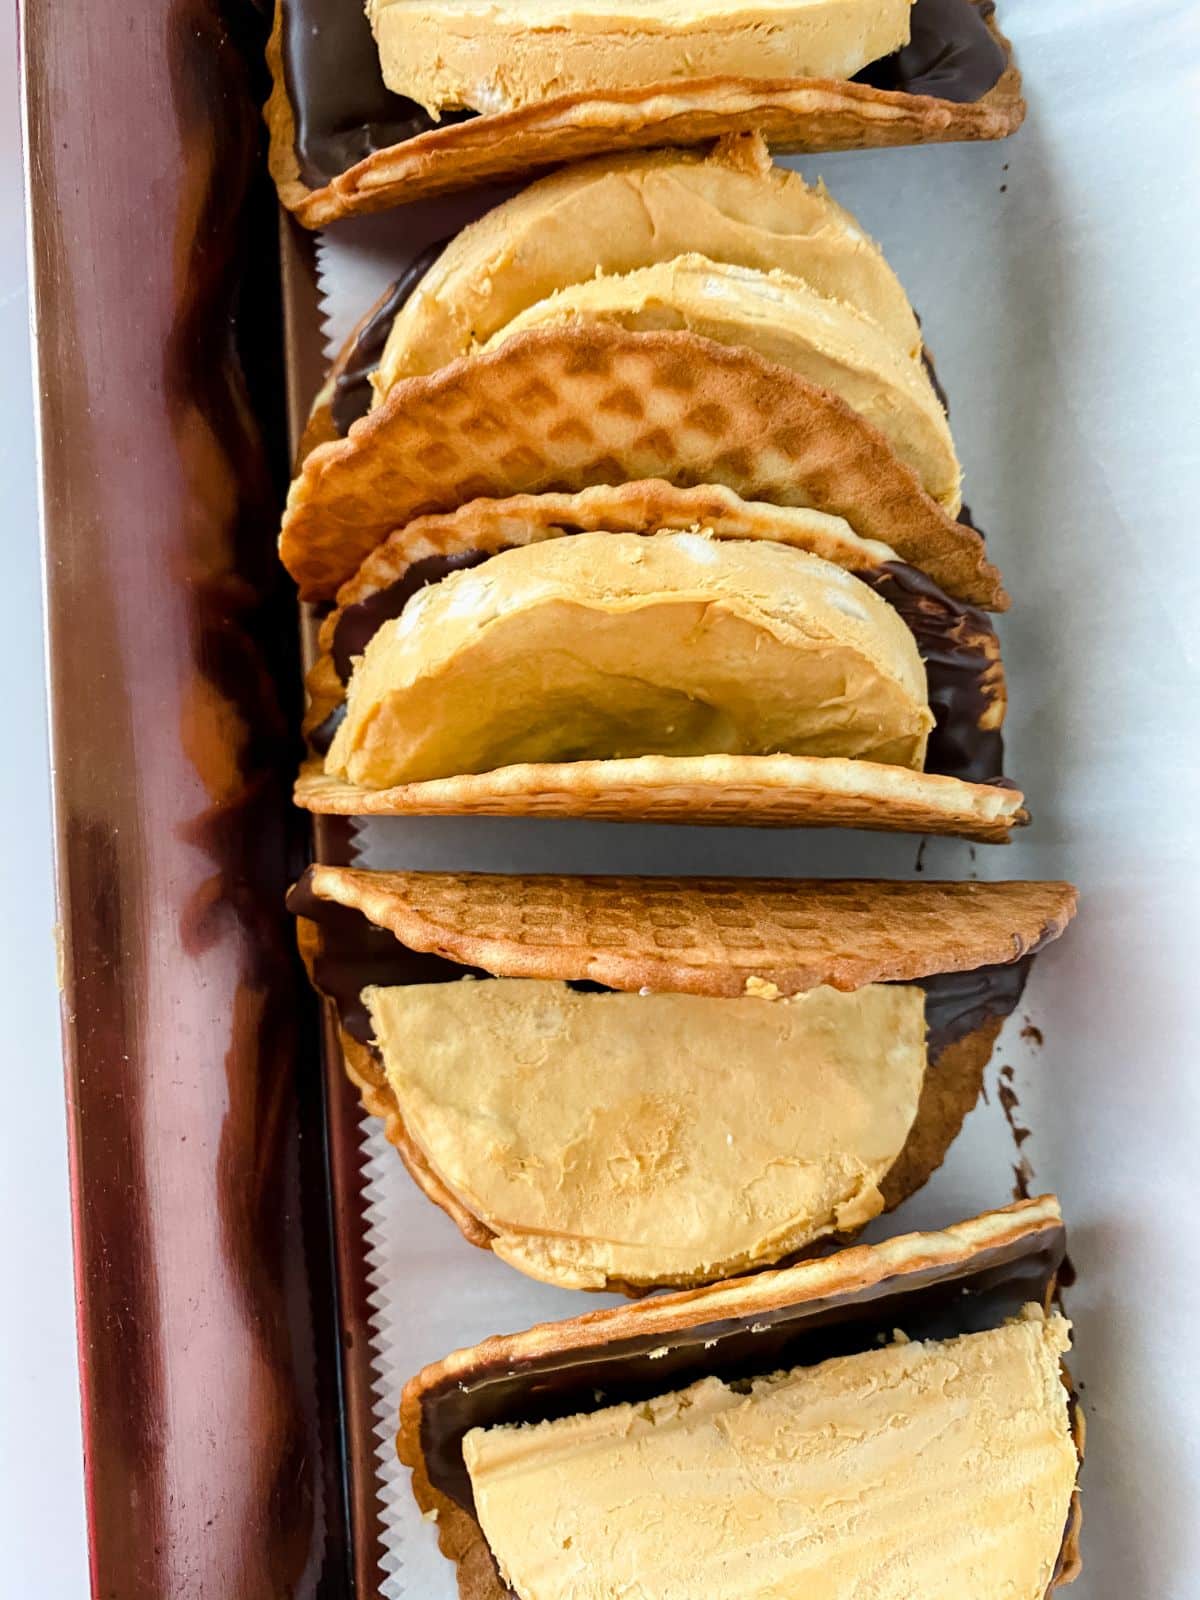 waffle cones with banana ice cream discs laying on brown platter